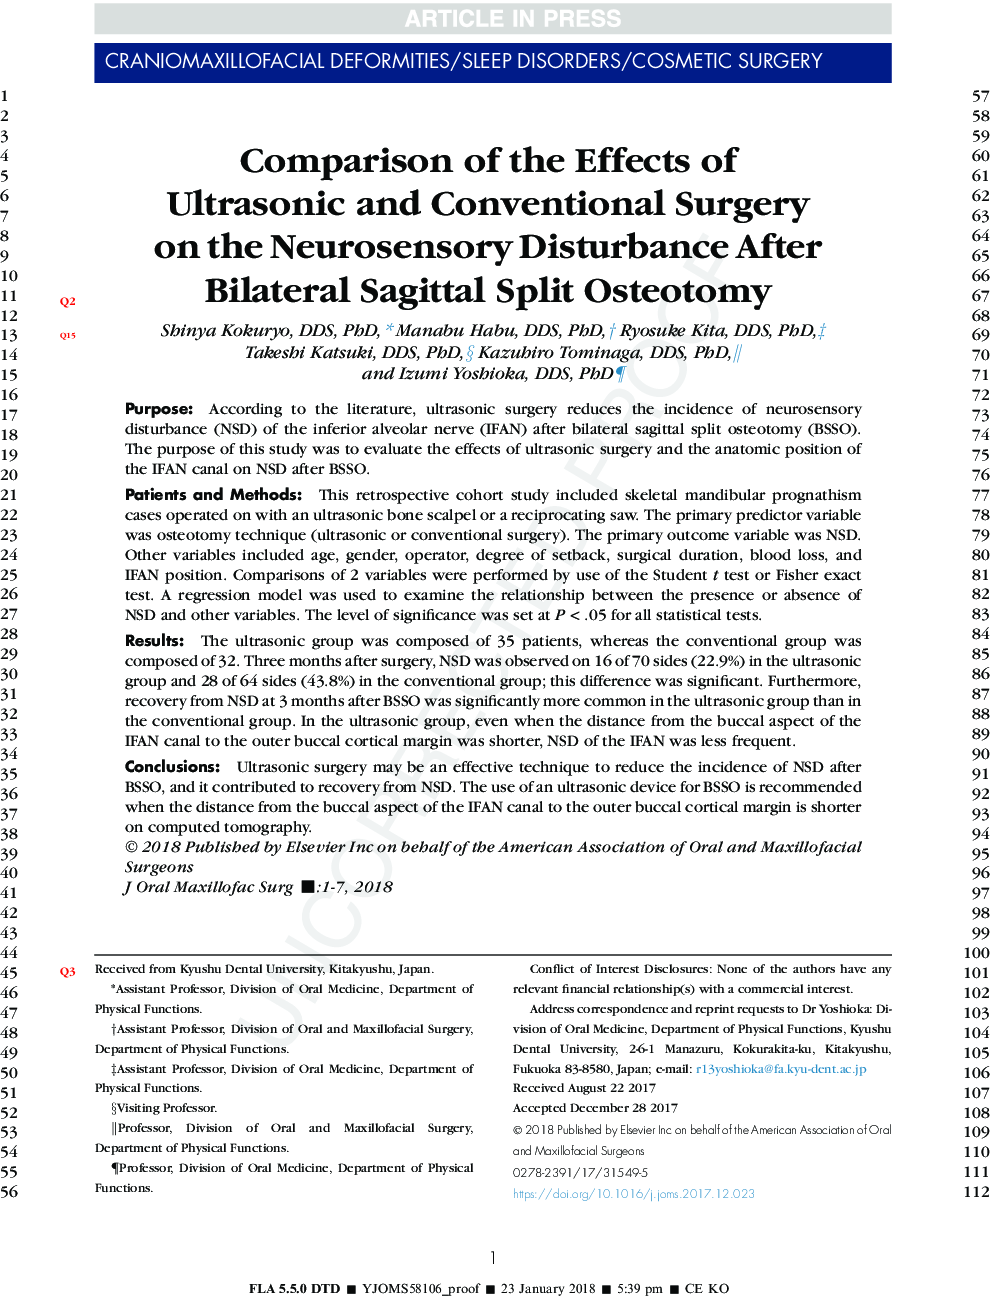 Comparison of the Effects of Ultrasonic and Conventional Surgery on the Neurosensory Disturbance After Bilateral Sagittal Split Osteotomy